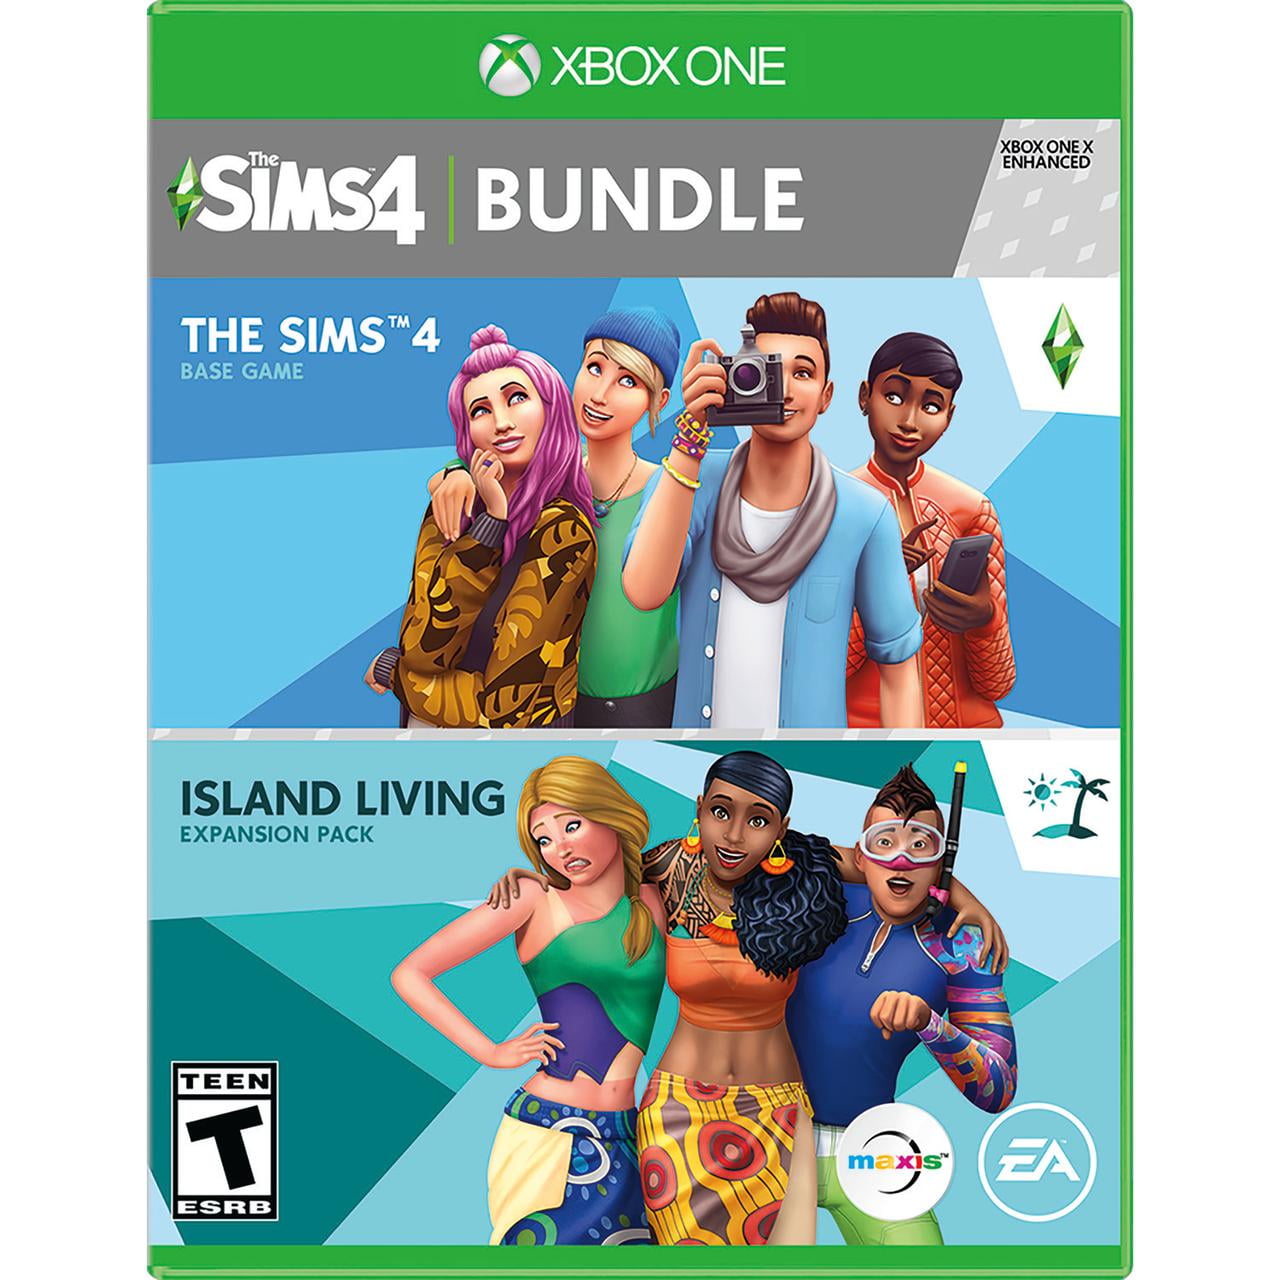 The Sims 4: Save $20 When You Build a Bundle on Origin